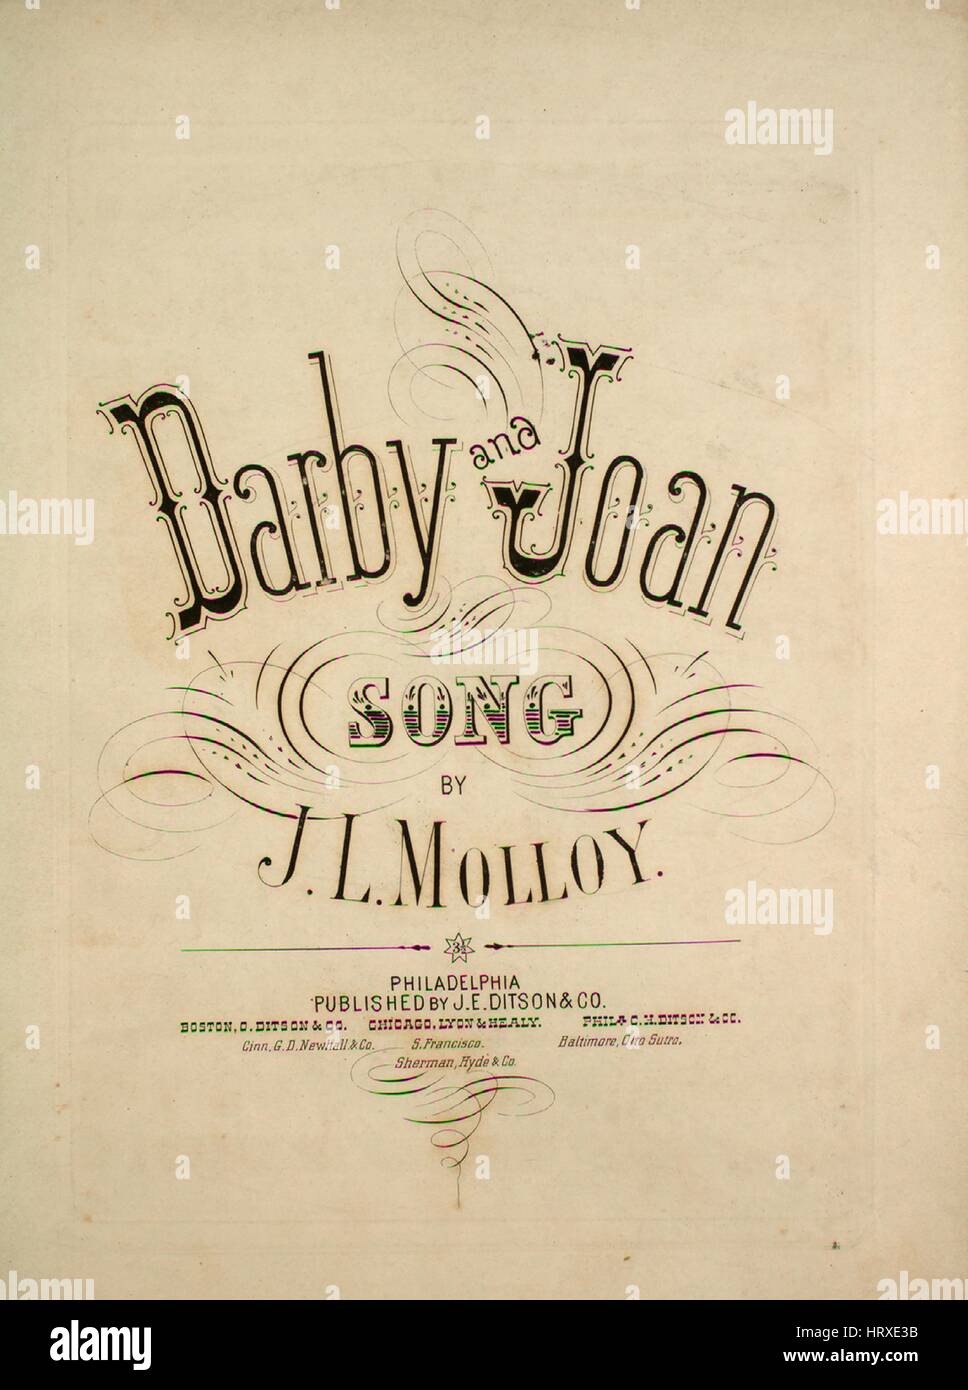 Sheet music cover image of the song 'Darby and Joan Song', with original authorship notes reading 'by JL Molloy', United States, 1900. The publisher is listed as 'J.E. Ditson and Co.', the form of composition is 'sectional', the instrumentation is 'piano and voice', the first line reads 'Darby dear, we are old and gray, fifty years since our wedding day', and the illustration artist is listed as 'None'. Stock Photo